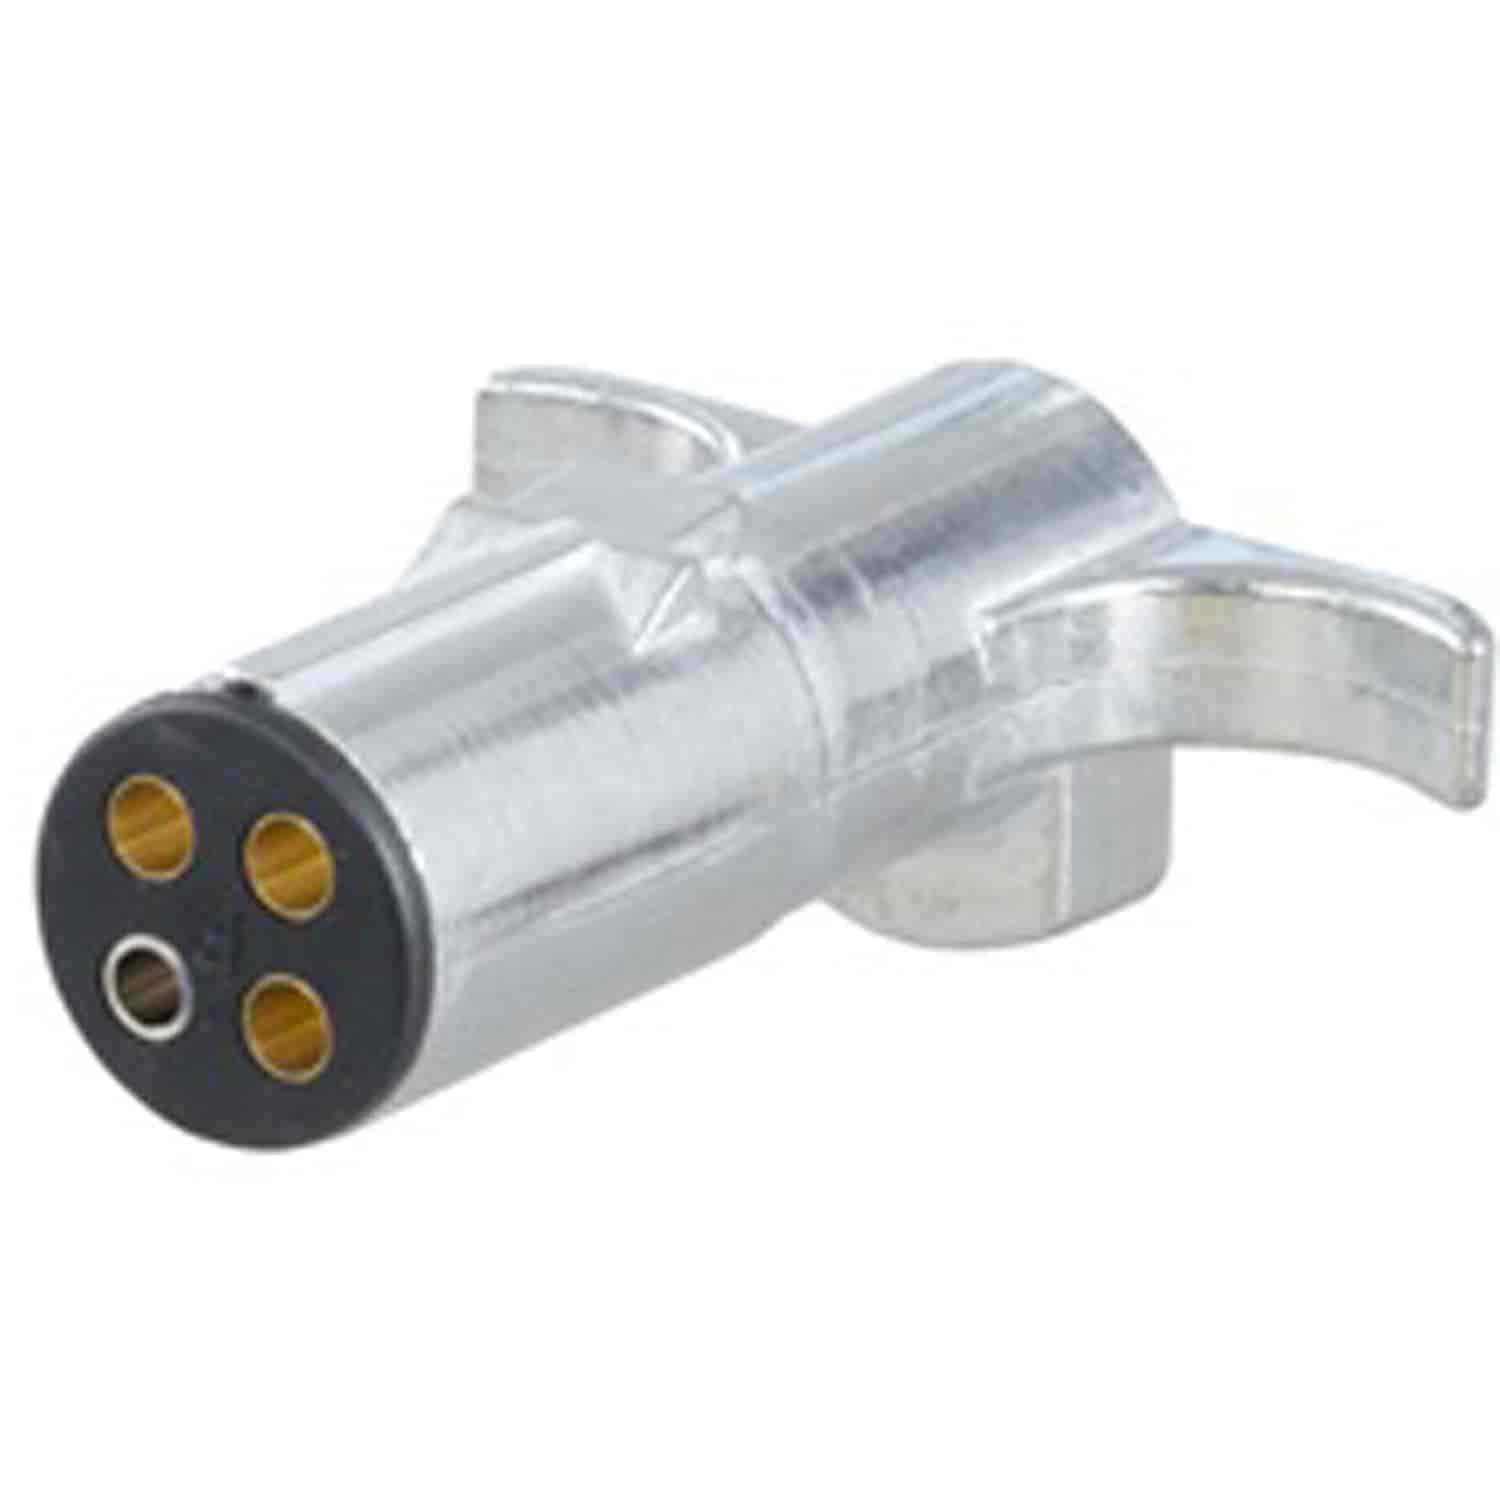 4-WAY ROUND PLUG PACKAGED - PKGD VERSION OF 58060